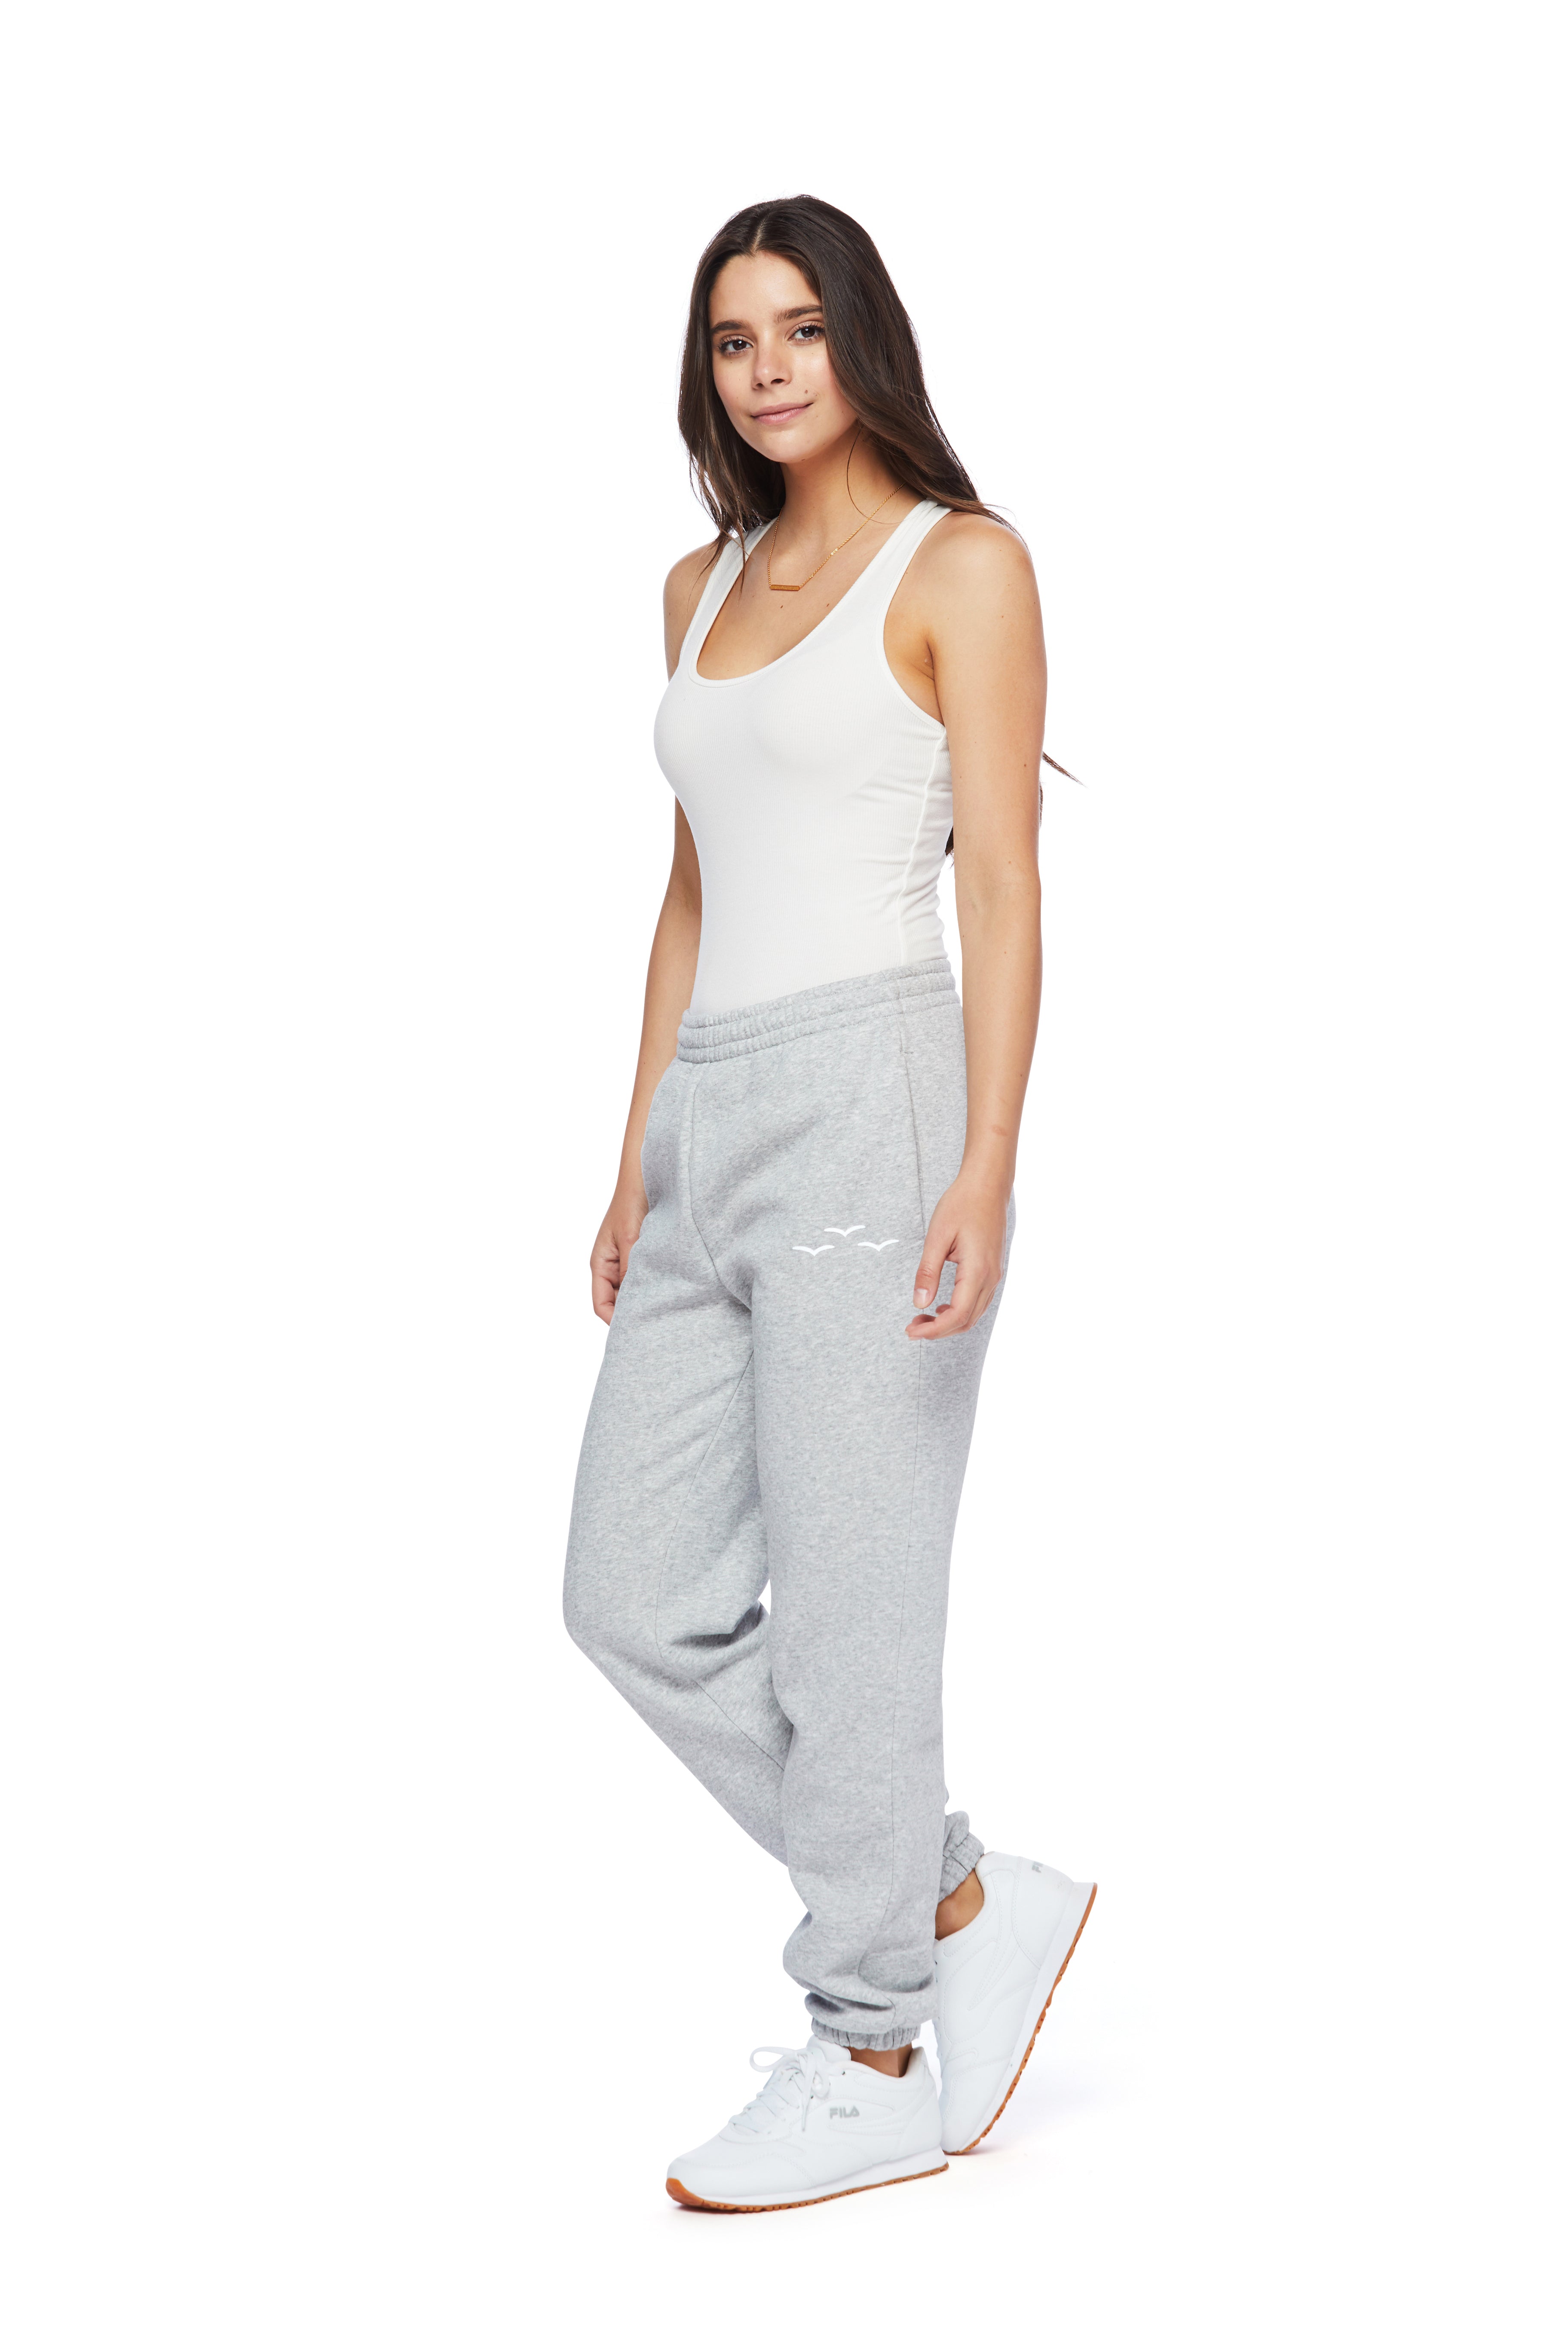 Nova Boyfriend Jogger in Classic Grey from Lazypants - always a great buy at a reasonable price.